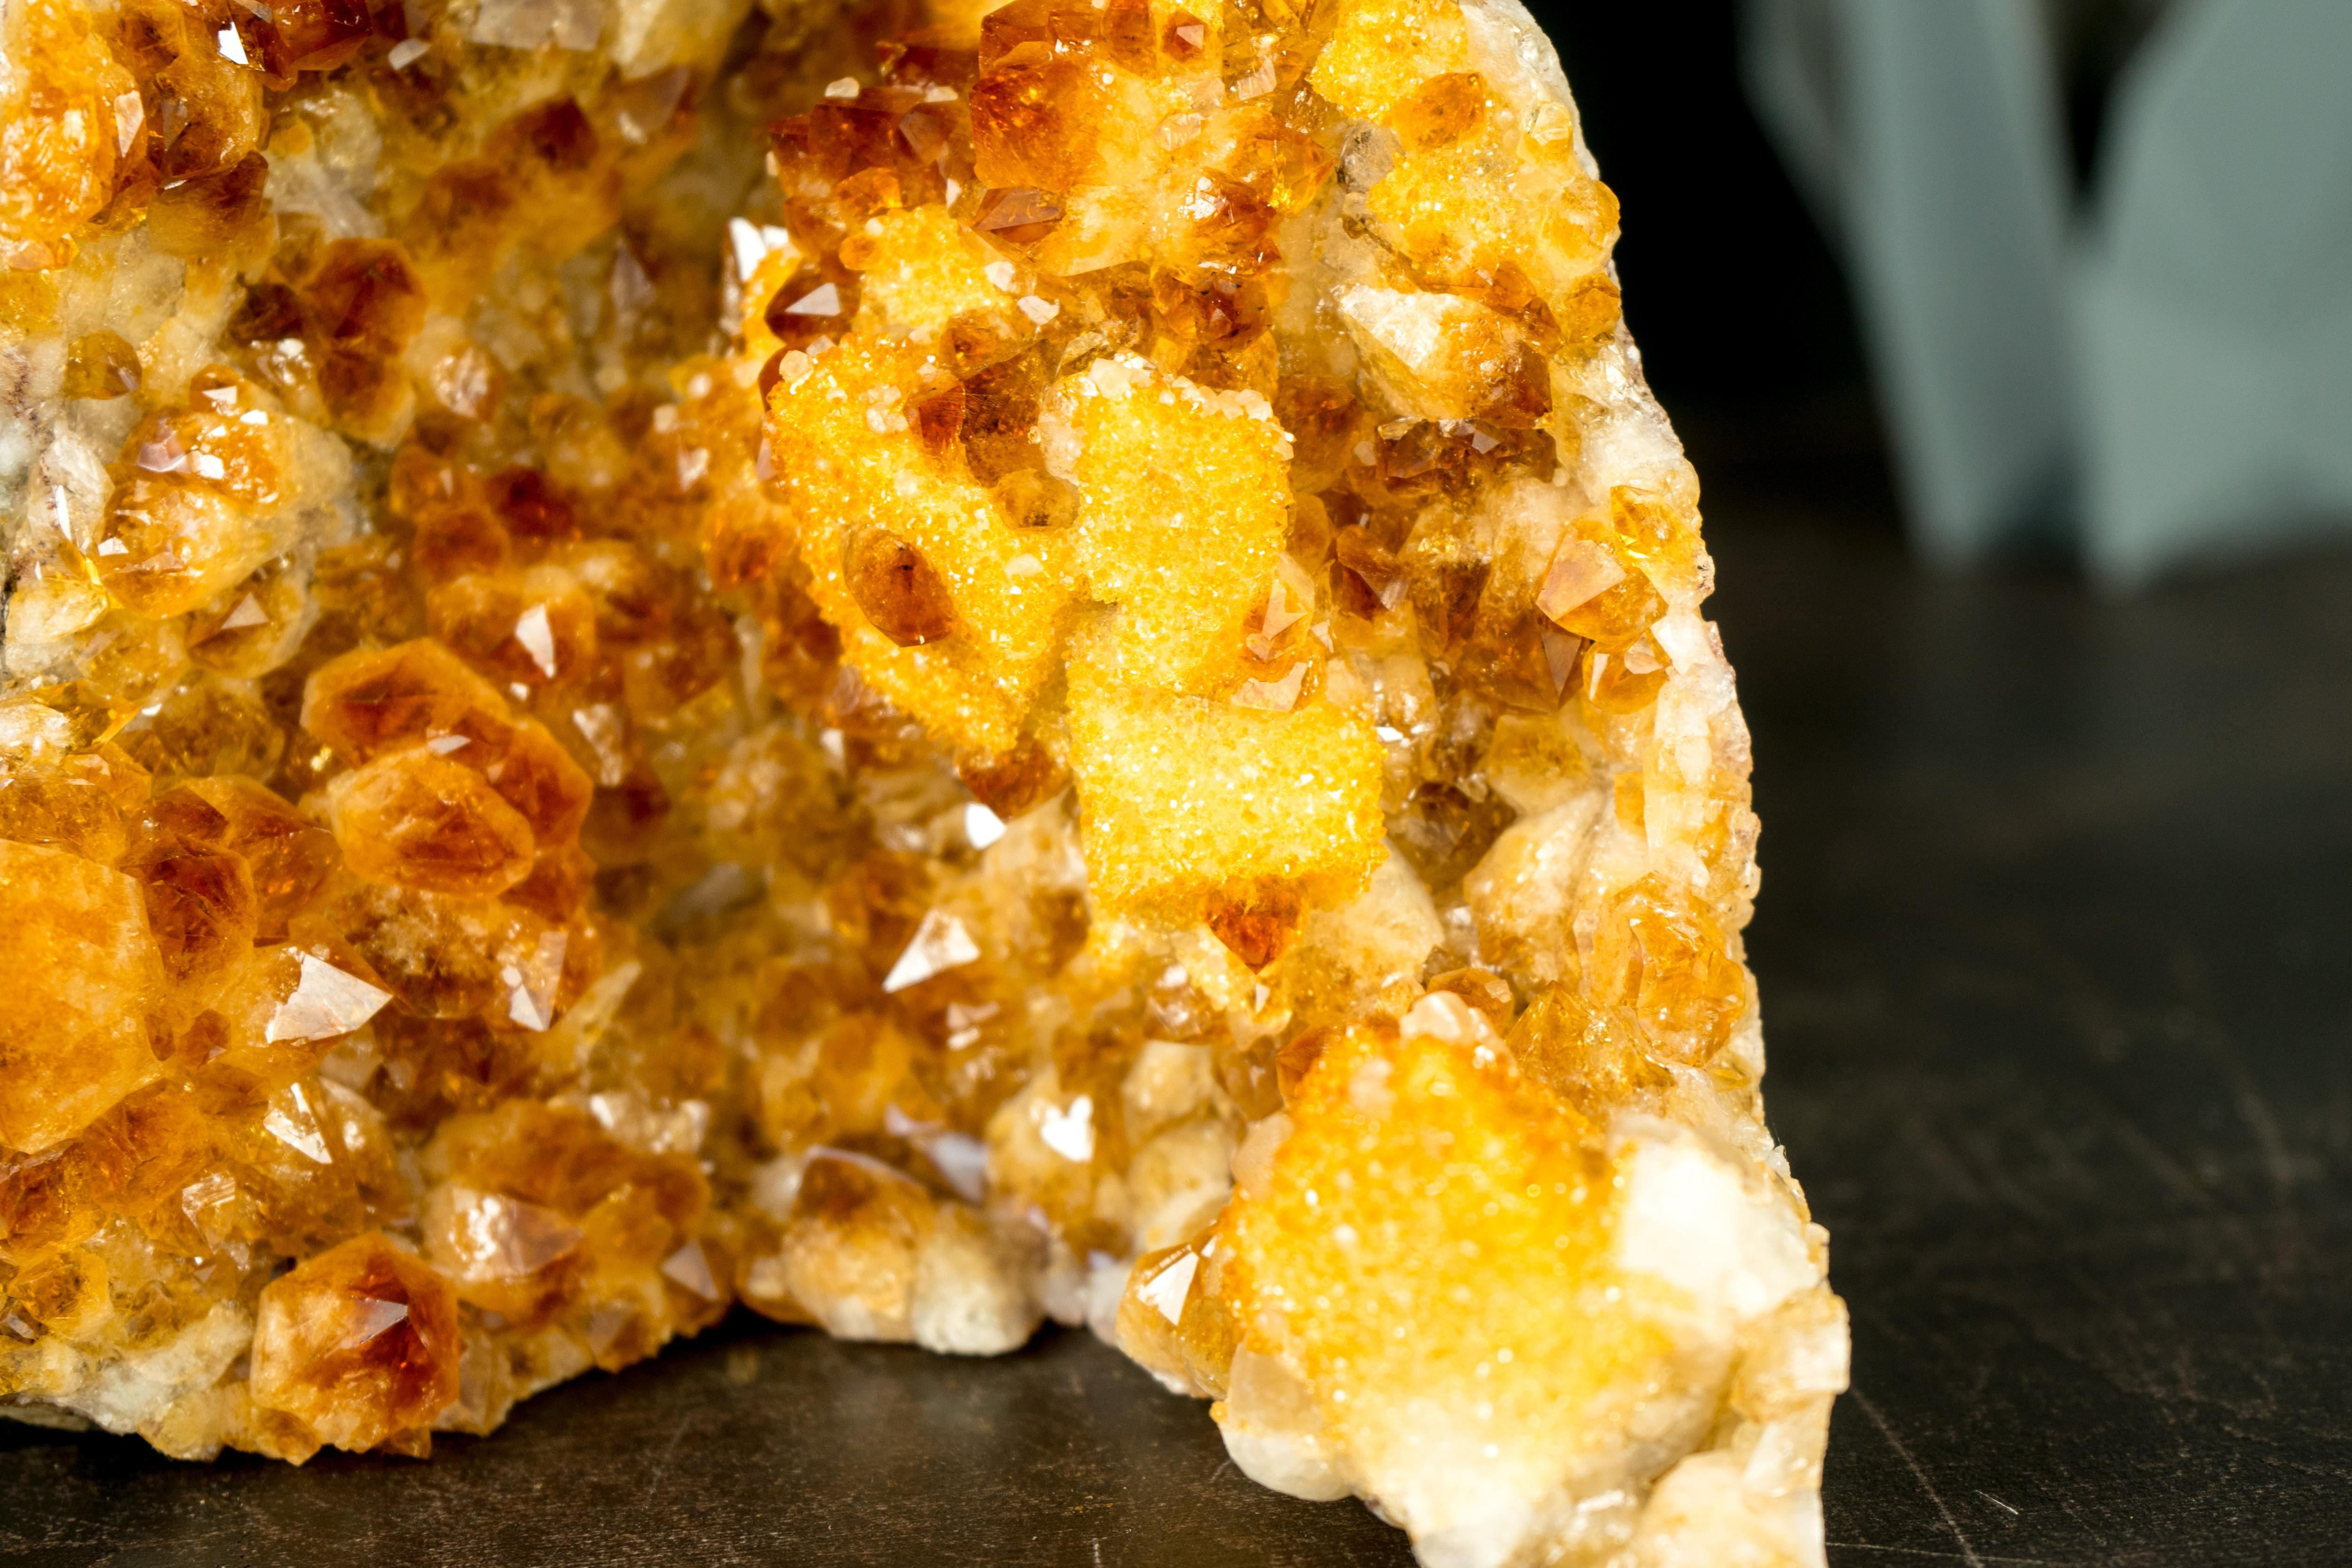 Radiant Citrine Cluster with Madeira Citrine Druzy and Galaxy Druzy on Calcite For Sale 1